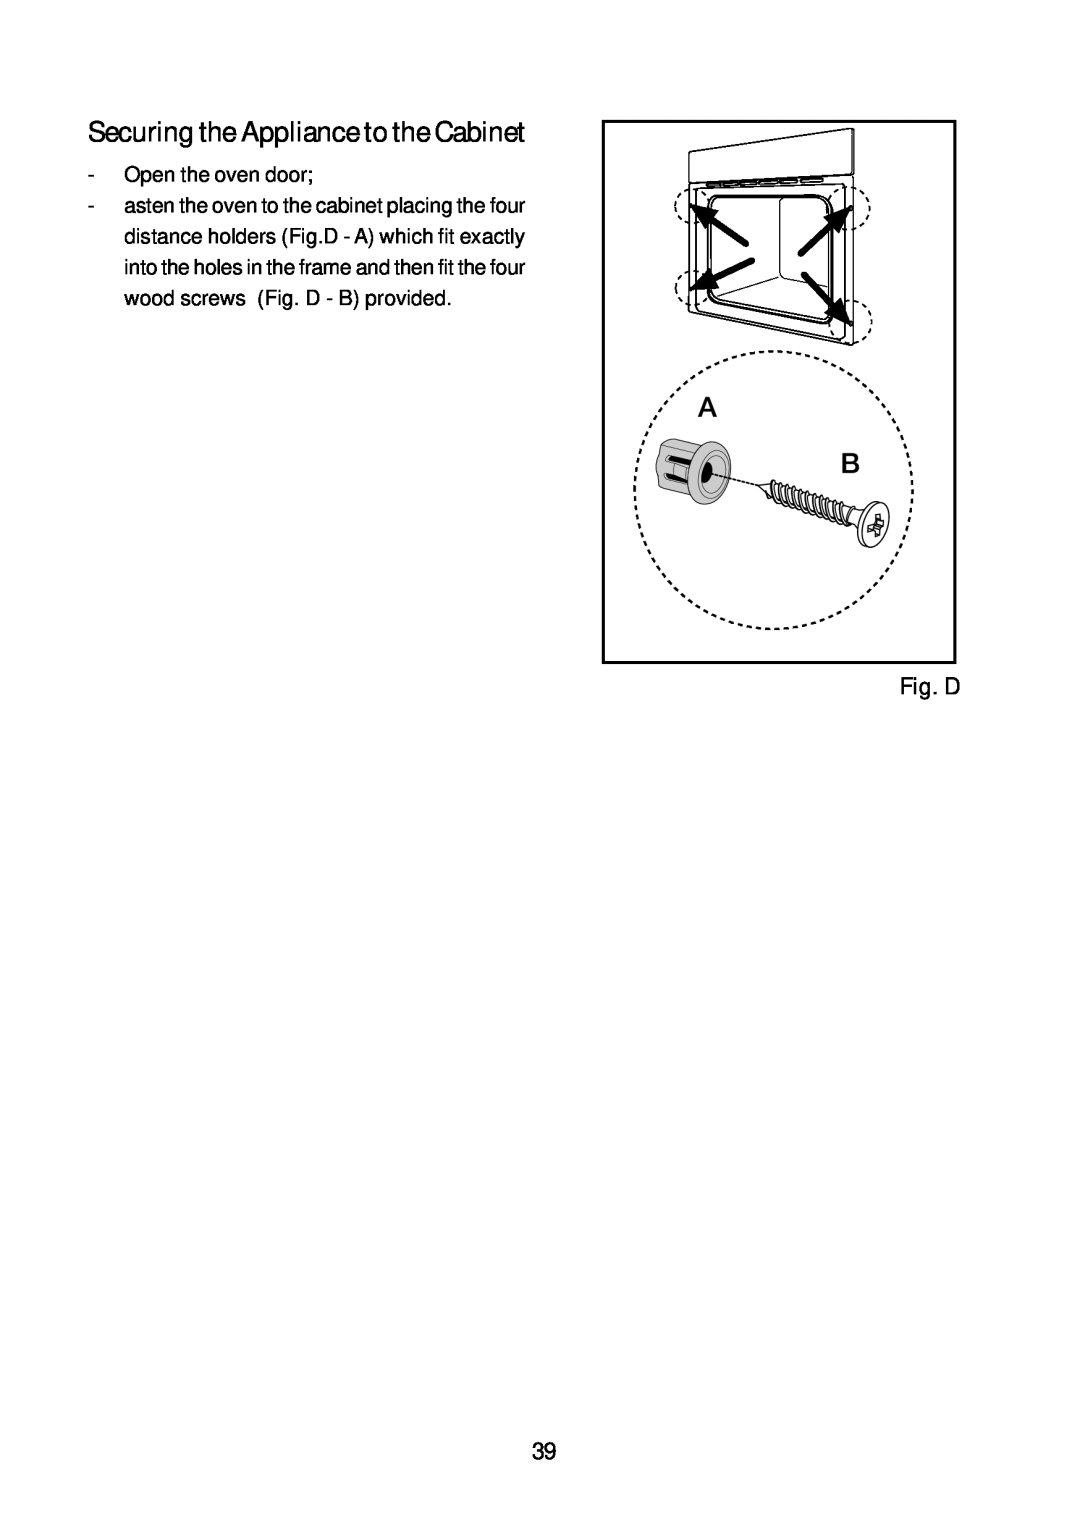 John Lewis JLBIOS664 instruction manual Securing the Appliance to the Cabinet, Open the oven door, Fig. D 